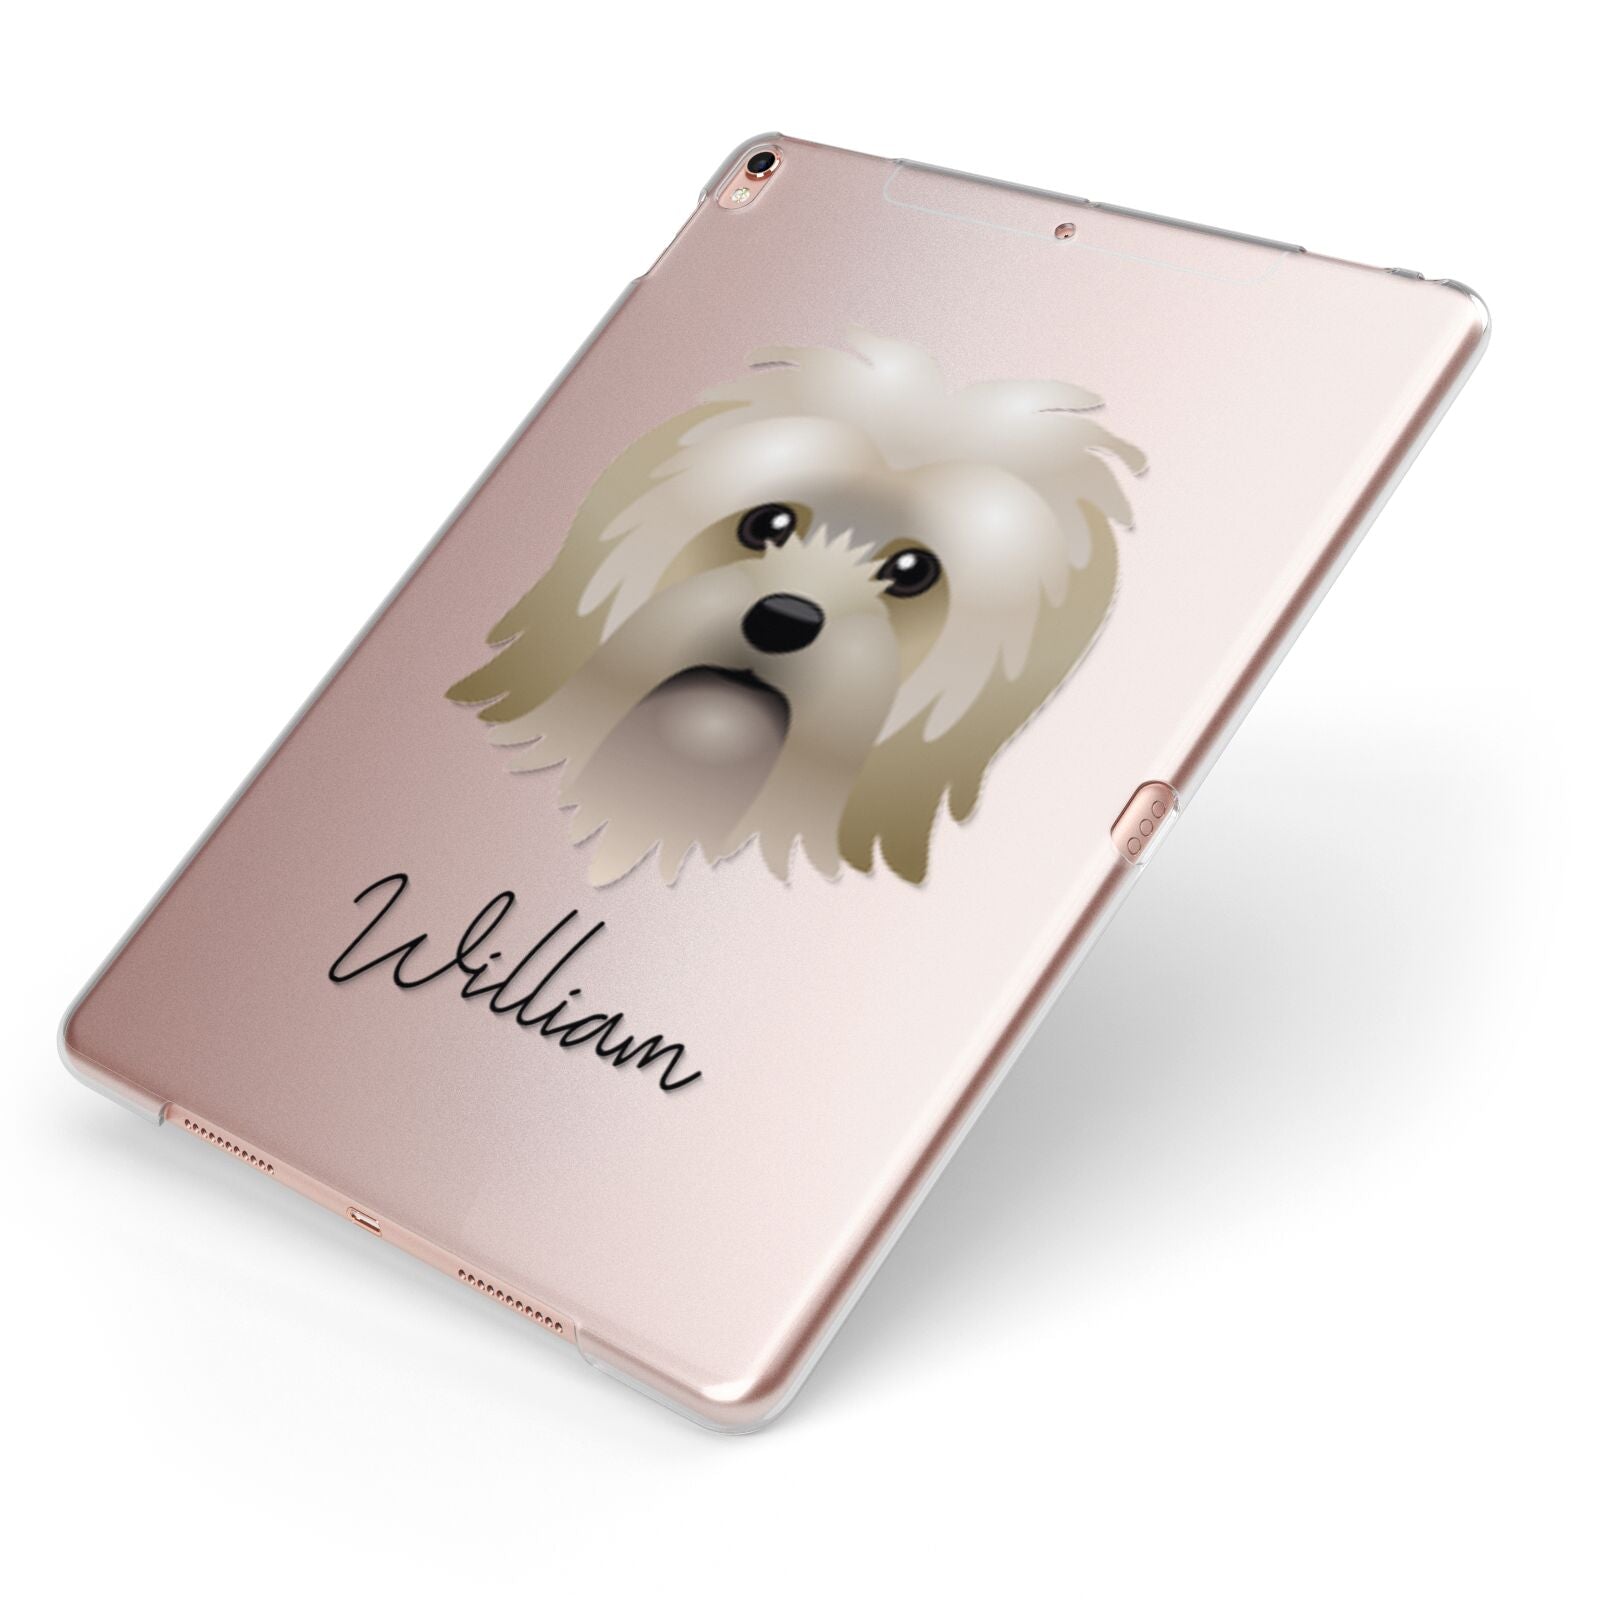 Lo wchen Personalised Apple iPad Case on Rose Gold iPad Side View